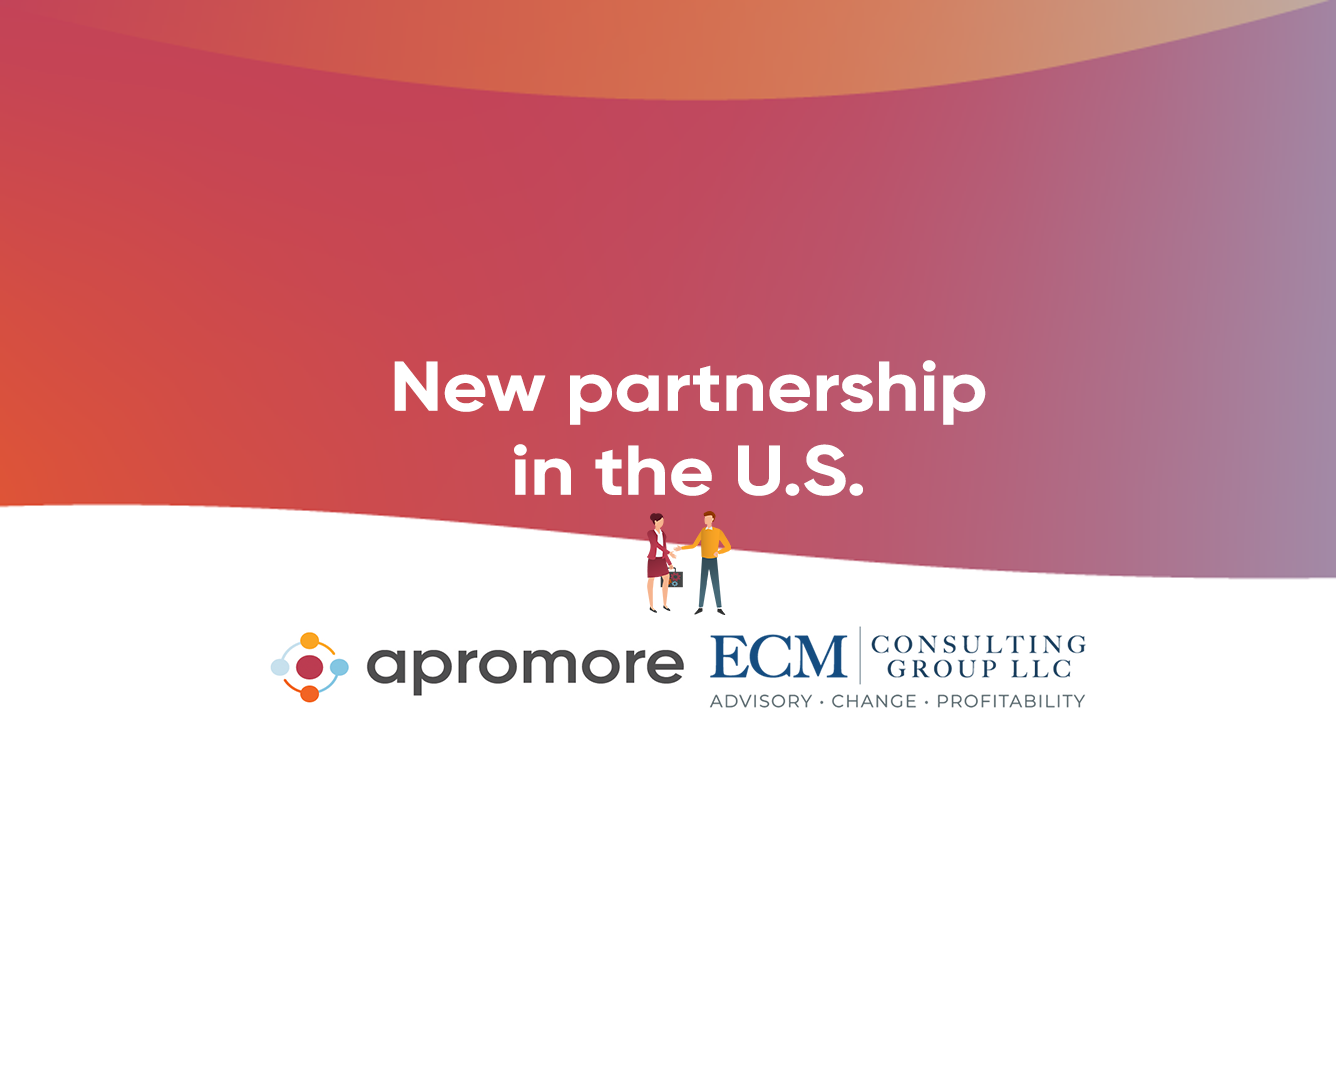 Apromore’s New Partnership in the US